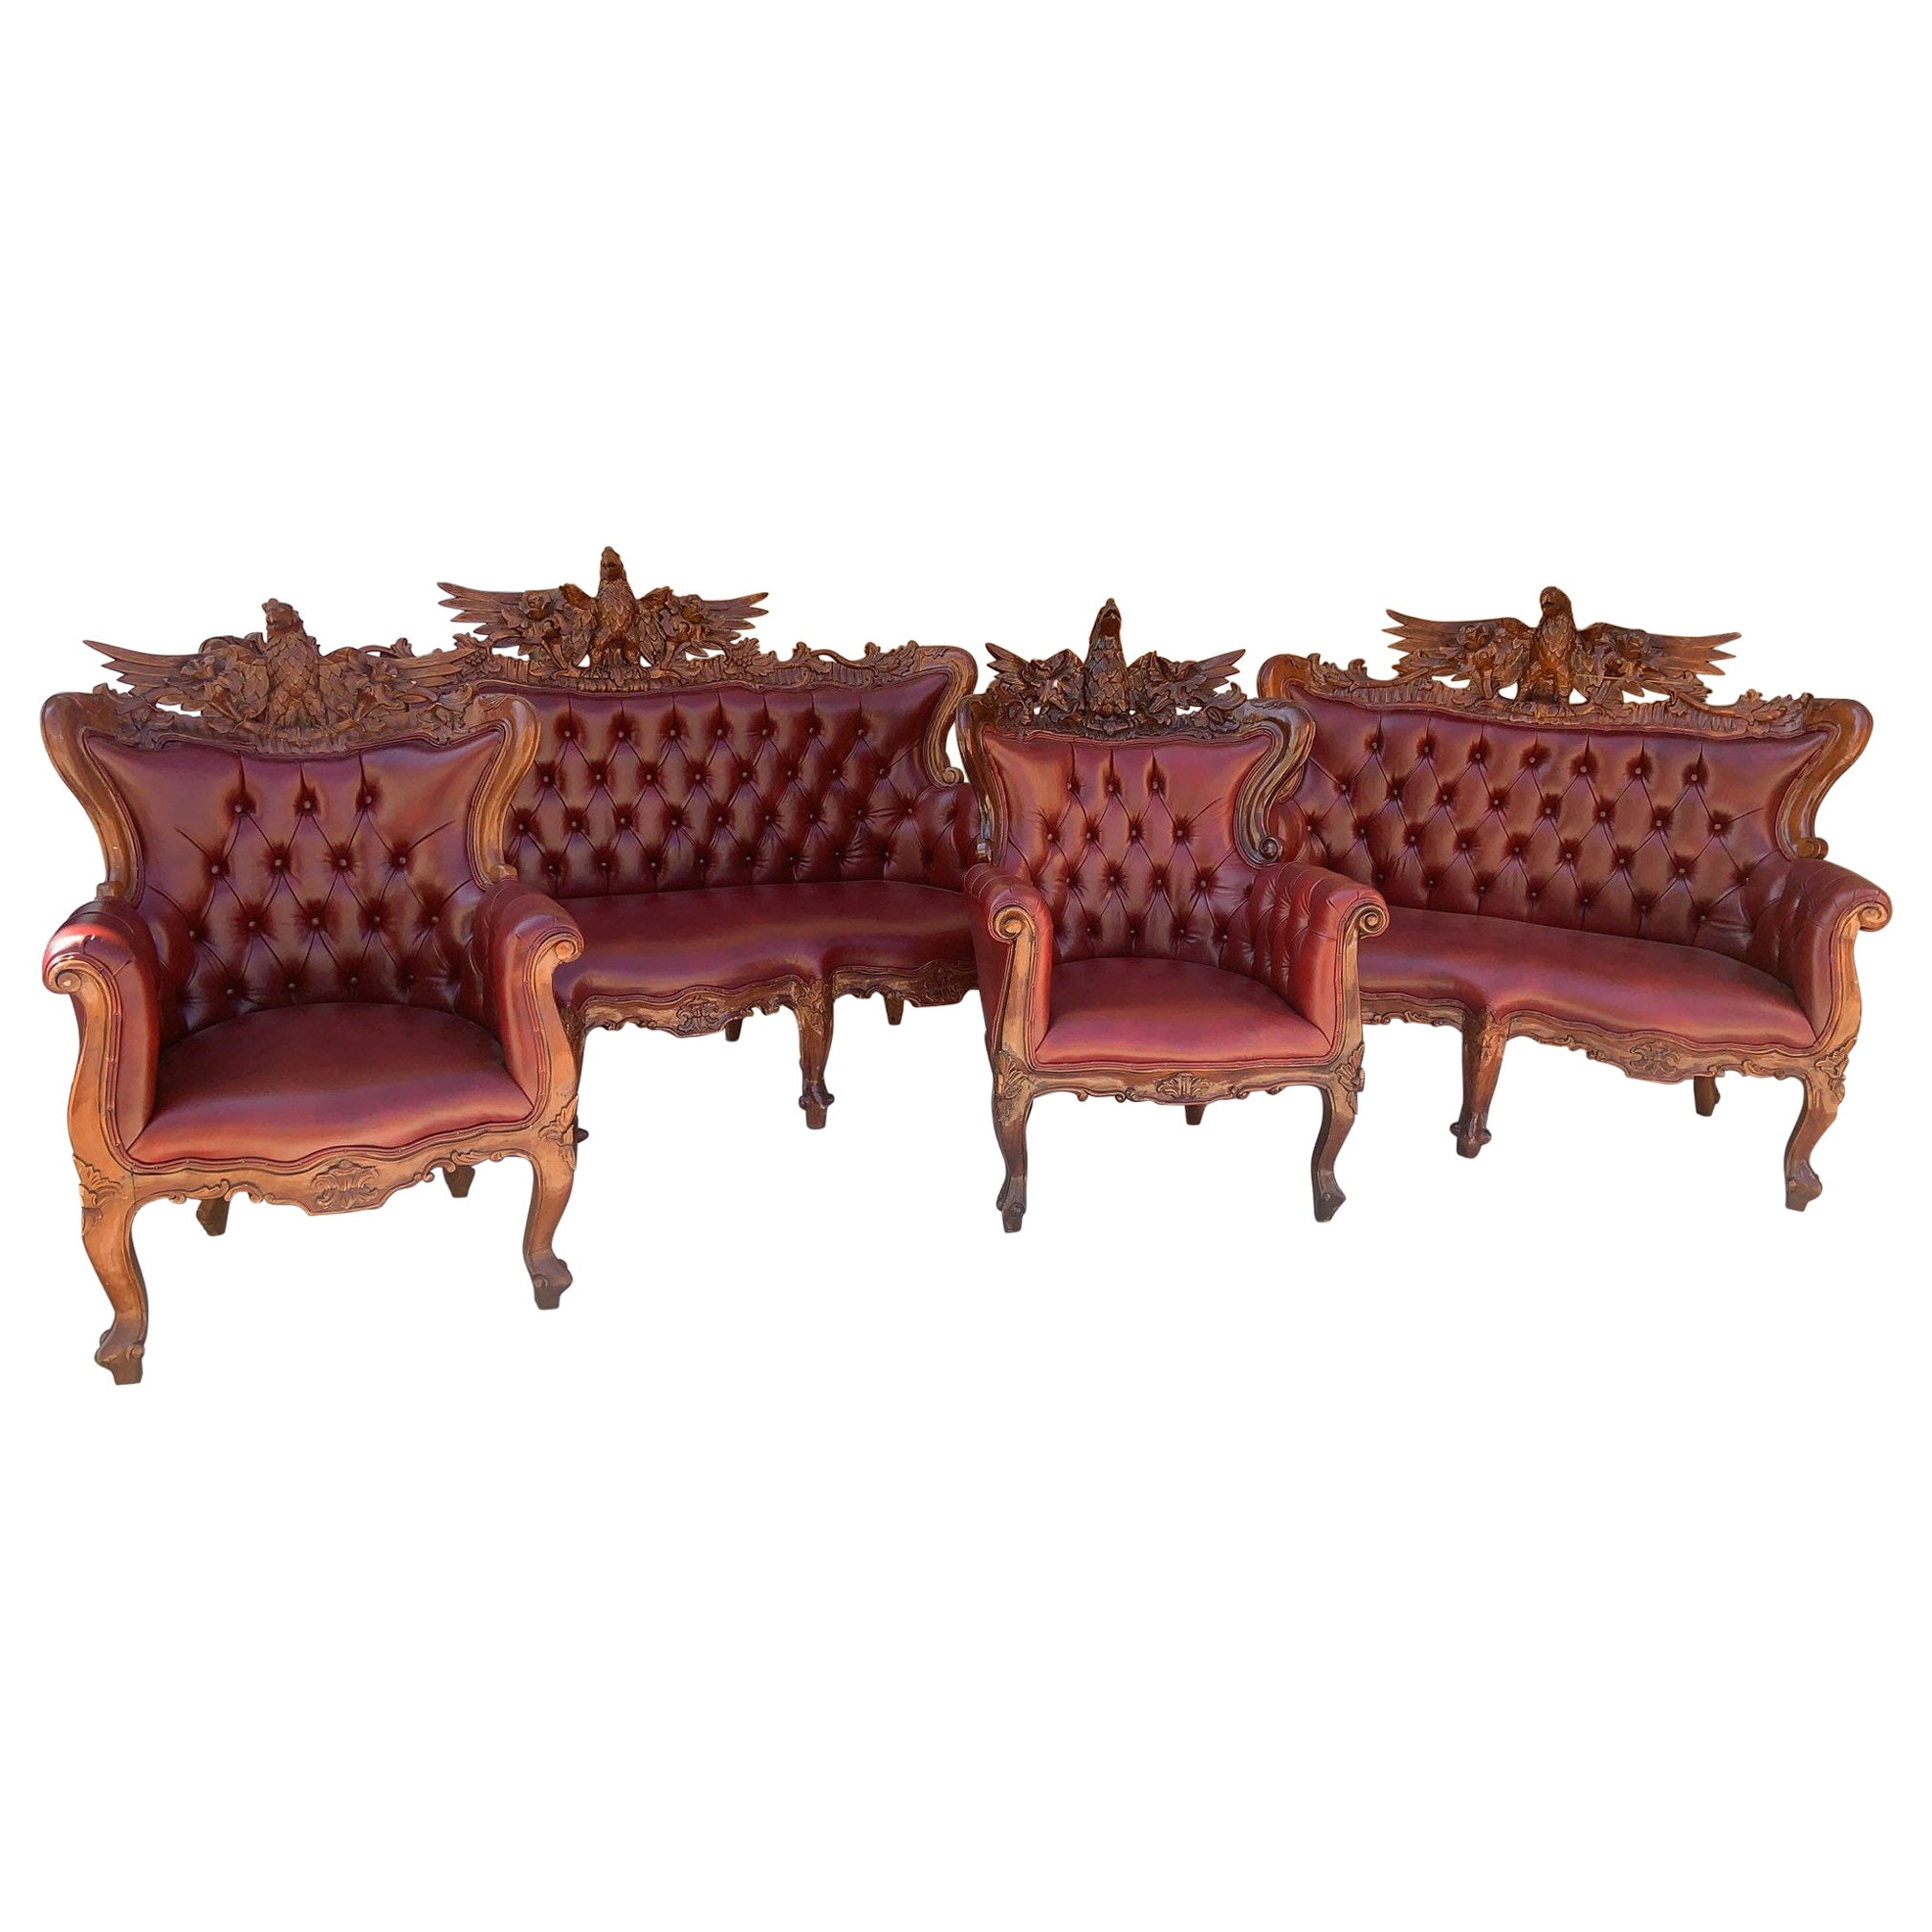 Federal Style Carved Ornate Tufted Parlor Set Newly Upholstered, Set of 4